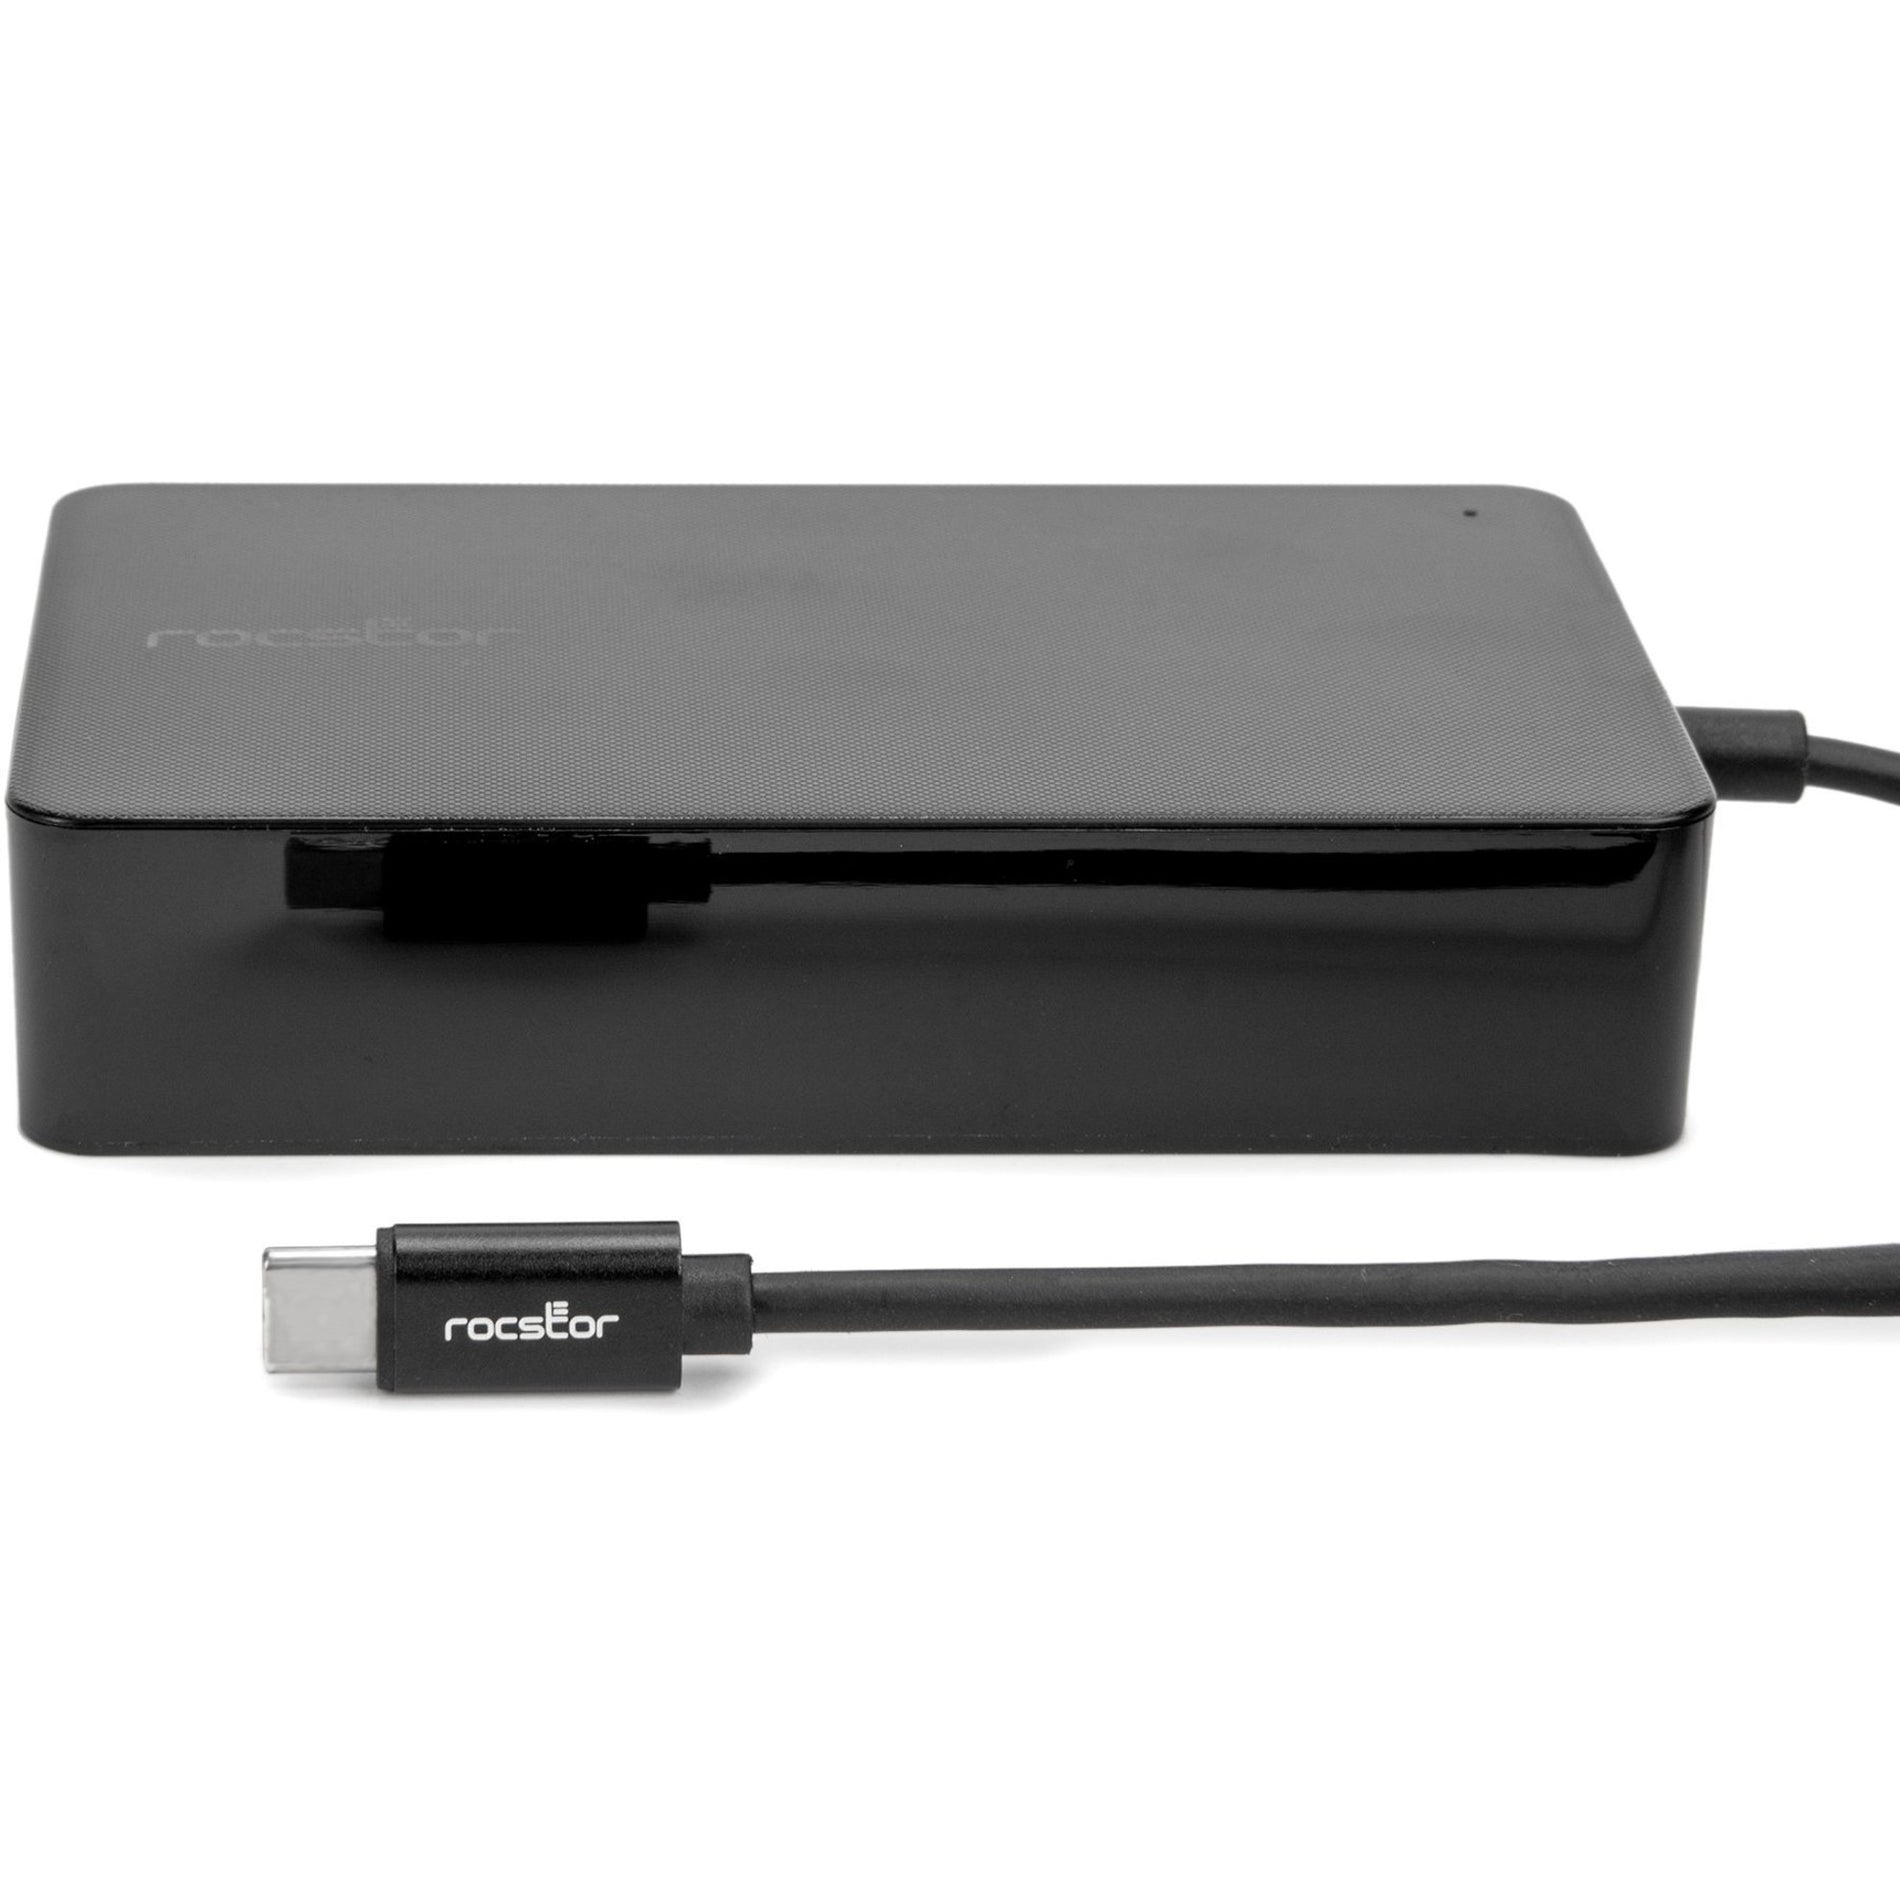 Rocstor Y10A274-B1 100W Smart USB-C Laptop Power Adapter Charger, Fast Charging for MacBook, Surface, iPad, and More